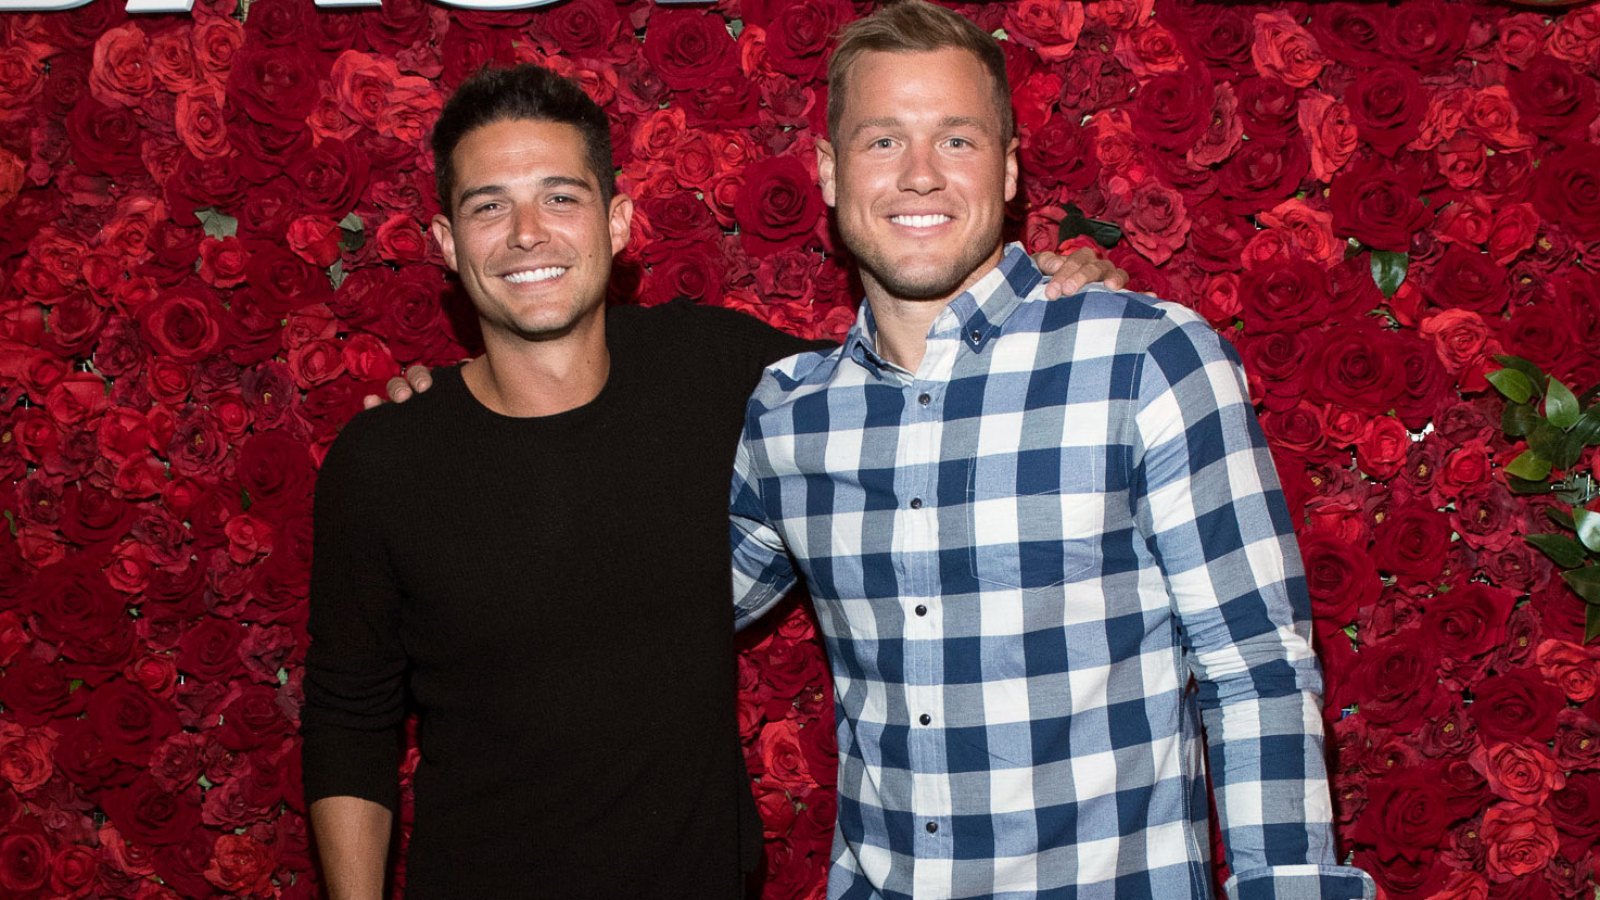 Wells Adams Leaves Suggestive Comment on Colton Underwood's Cuddly Post